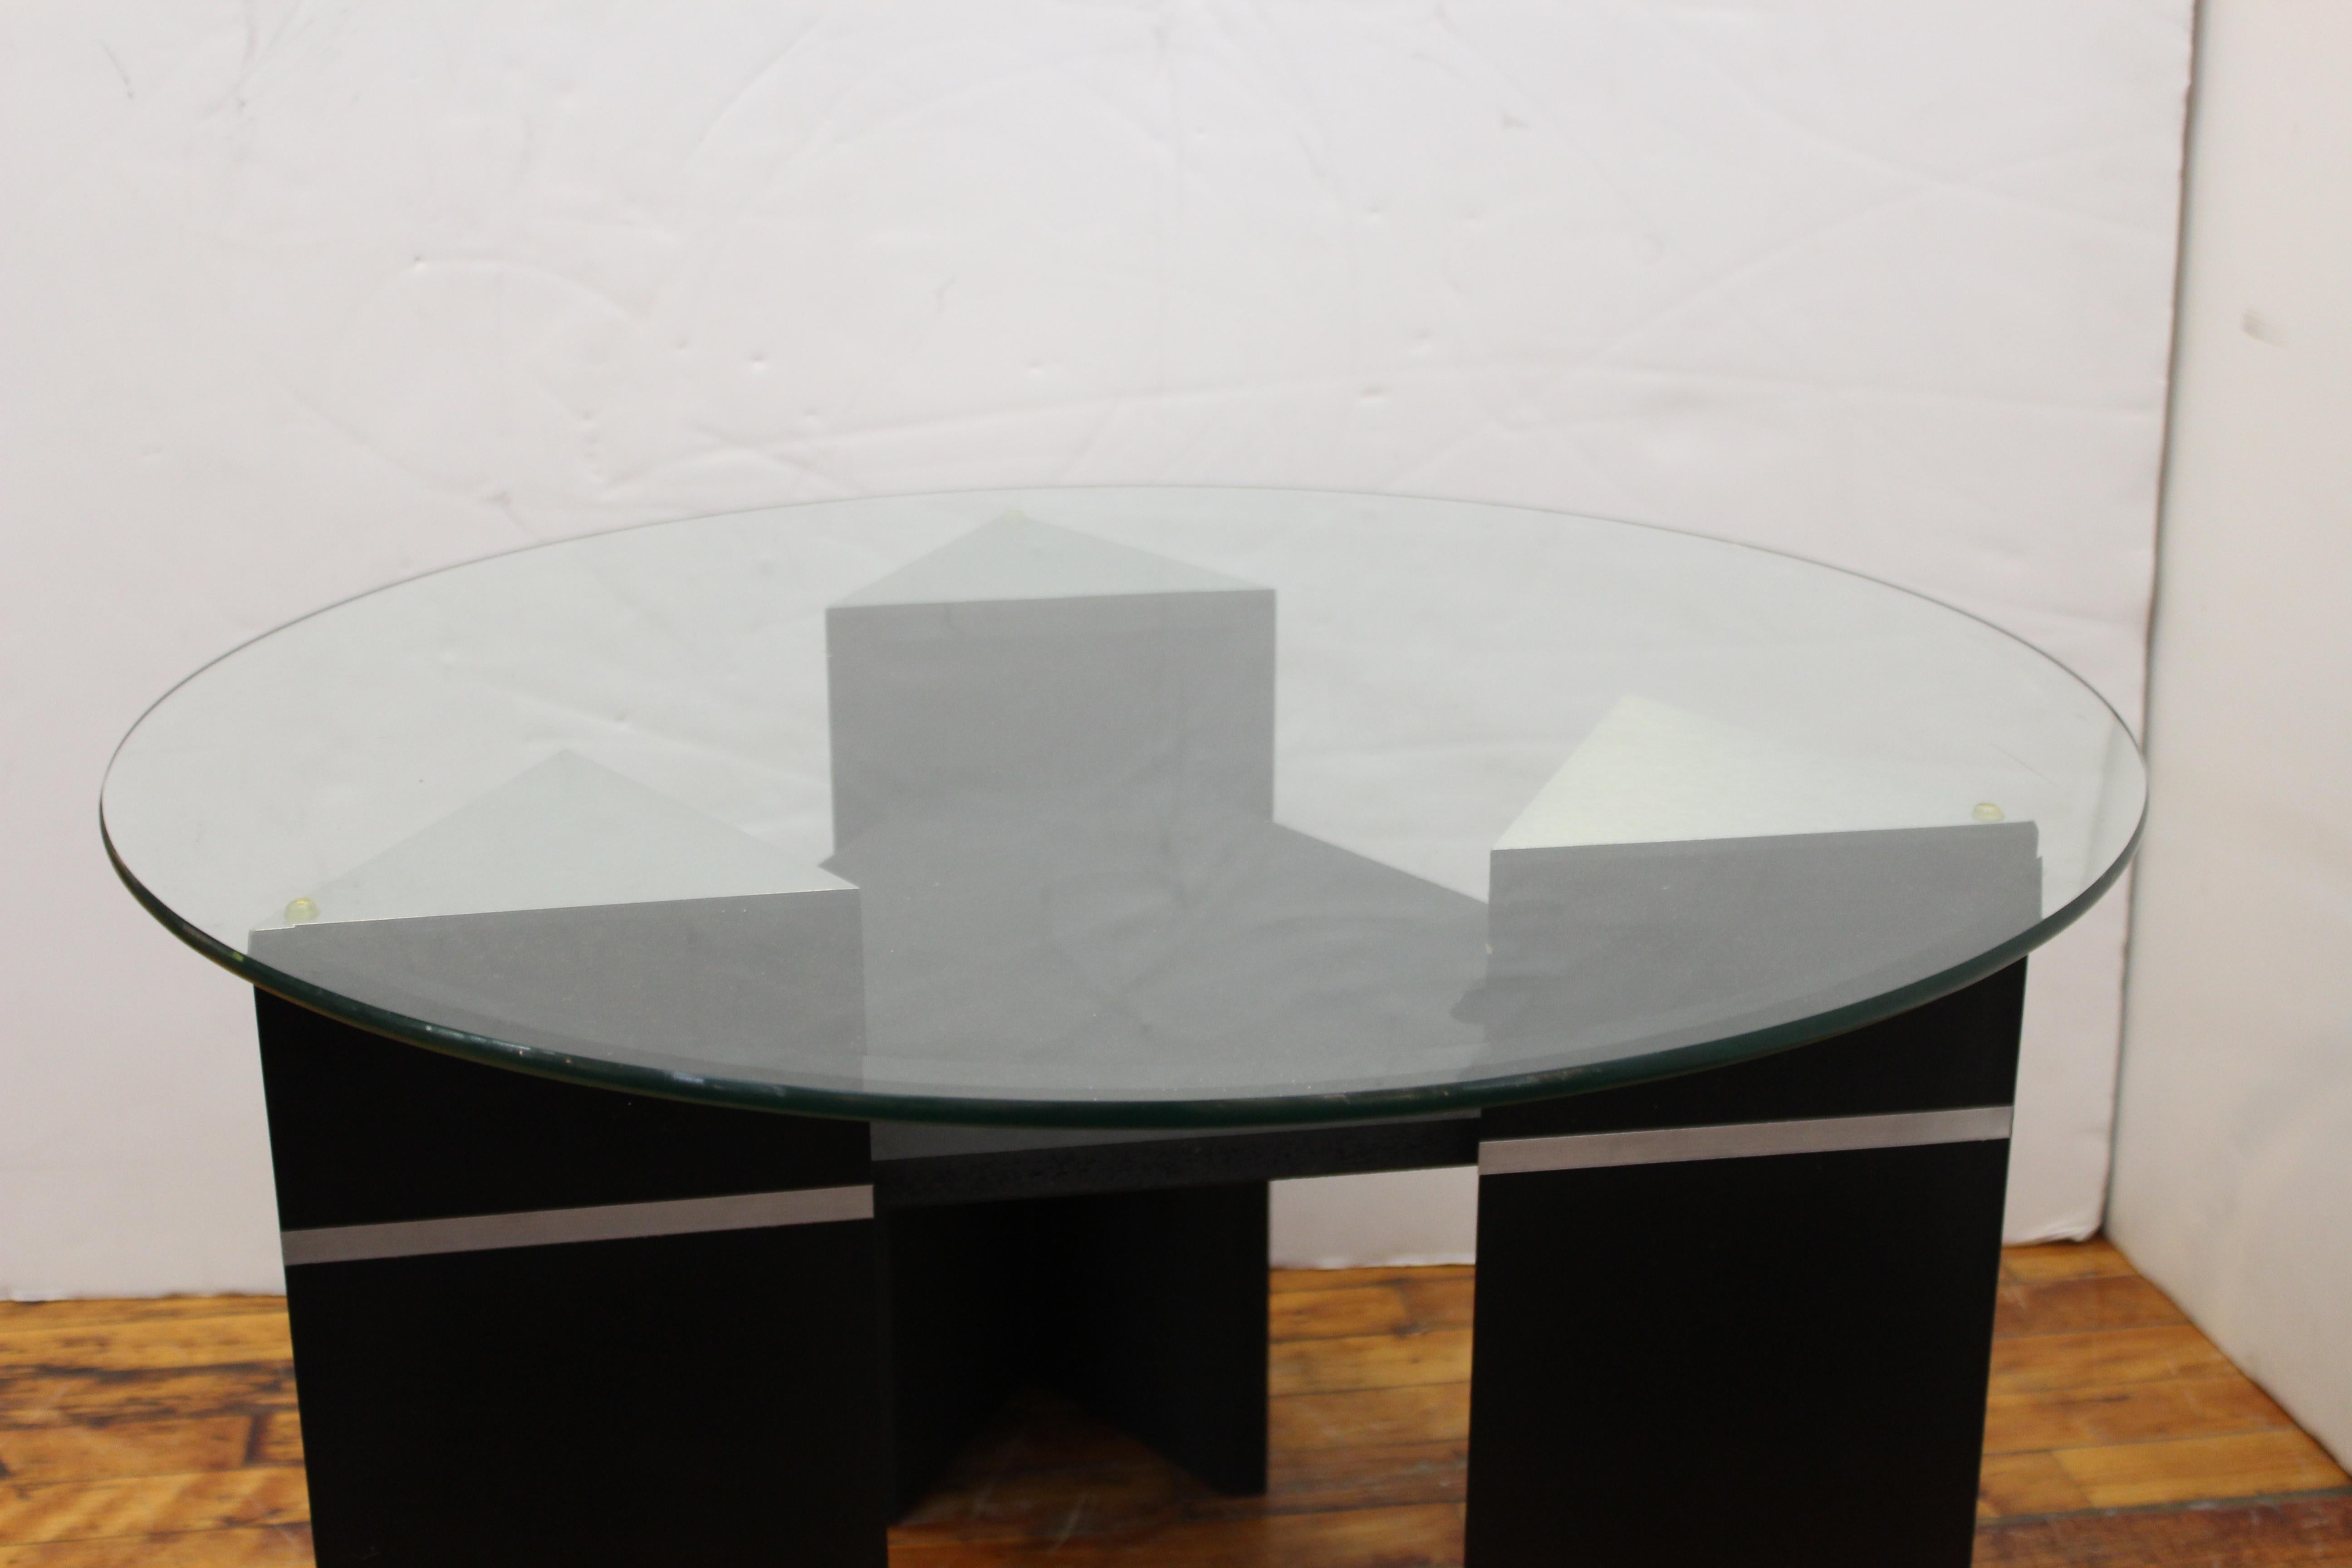 Postmodern Triangular Side Table or Coffee Table with Round Glass Top 3